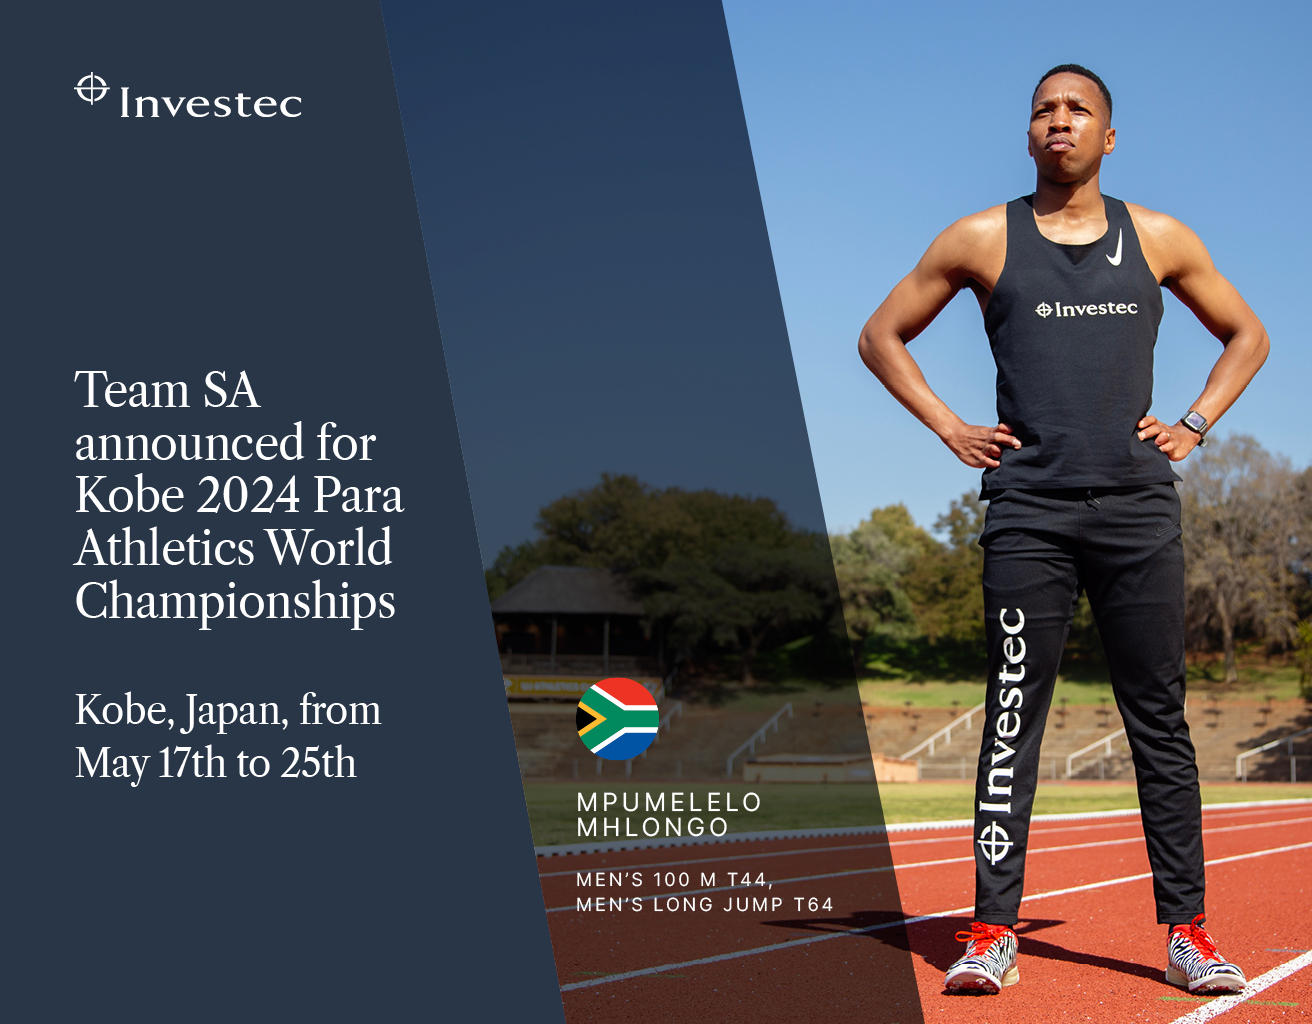 Mpumelelo Mhlongo is selected for Japan paraolympics